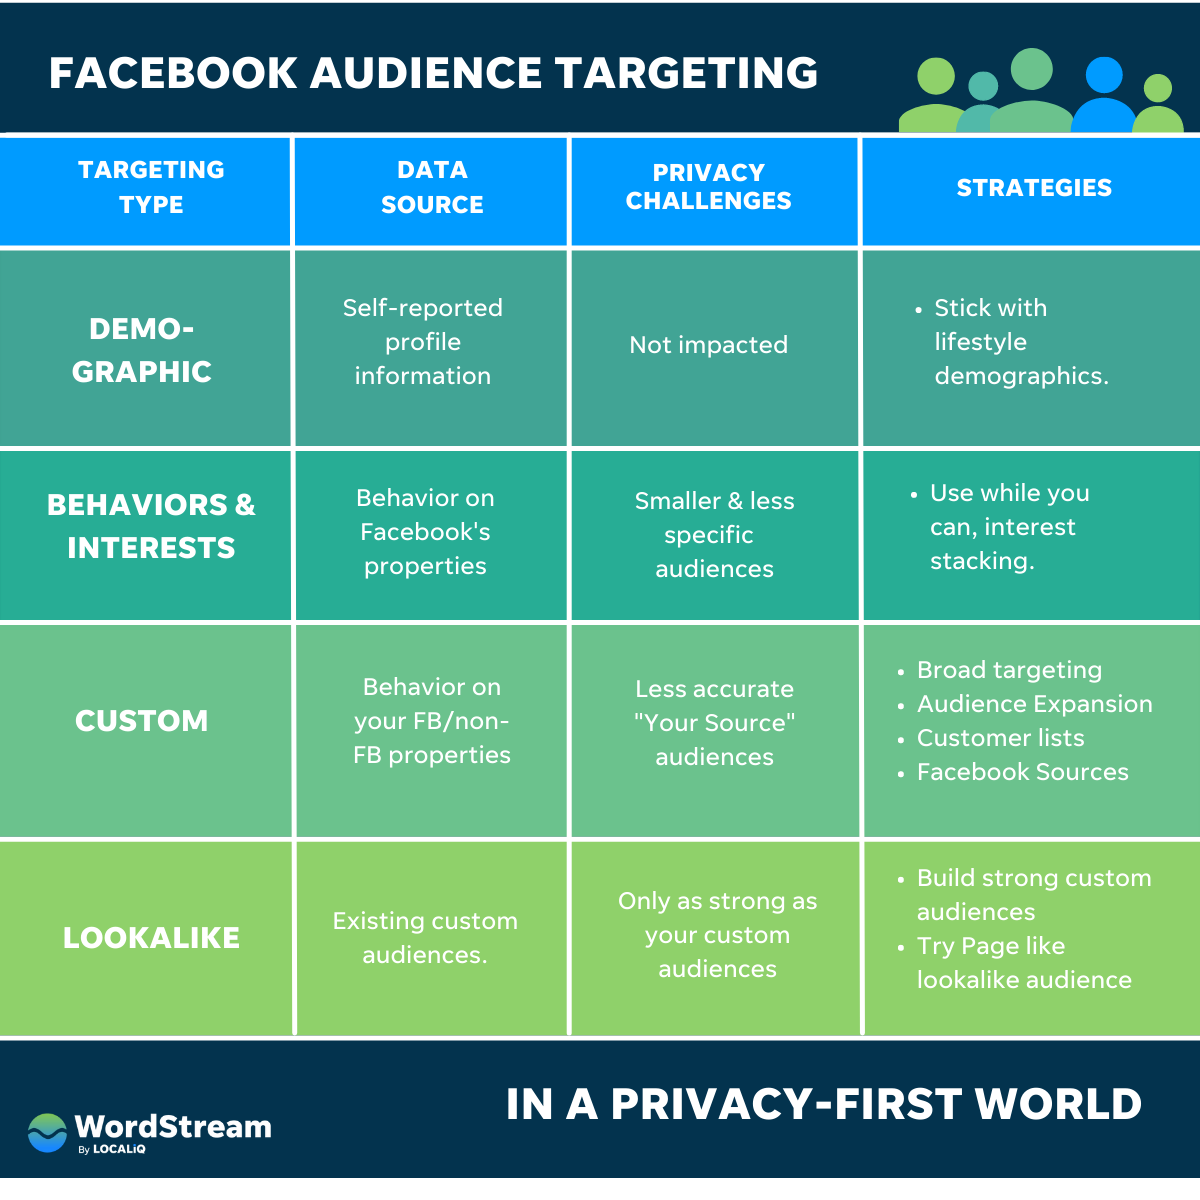 Types of Facebook Ads: 8 Facebook Ad Types That Attract Leads - WebFX